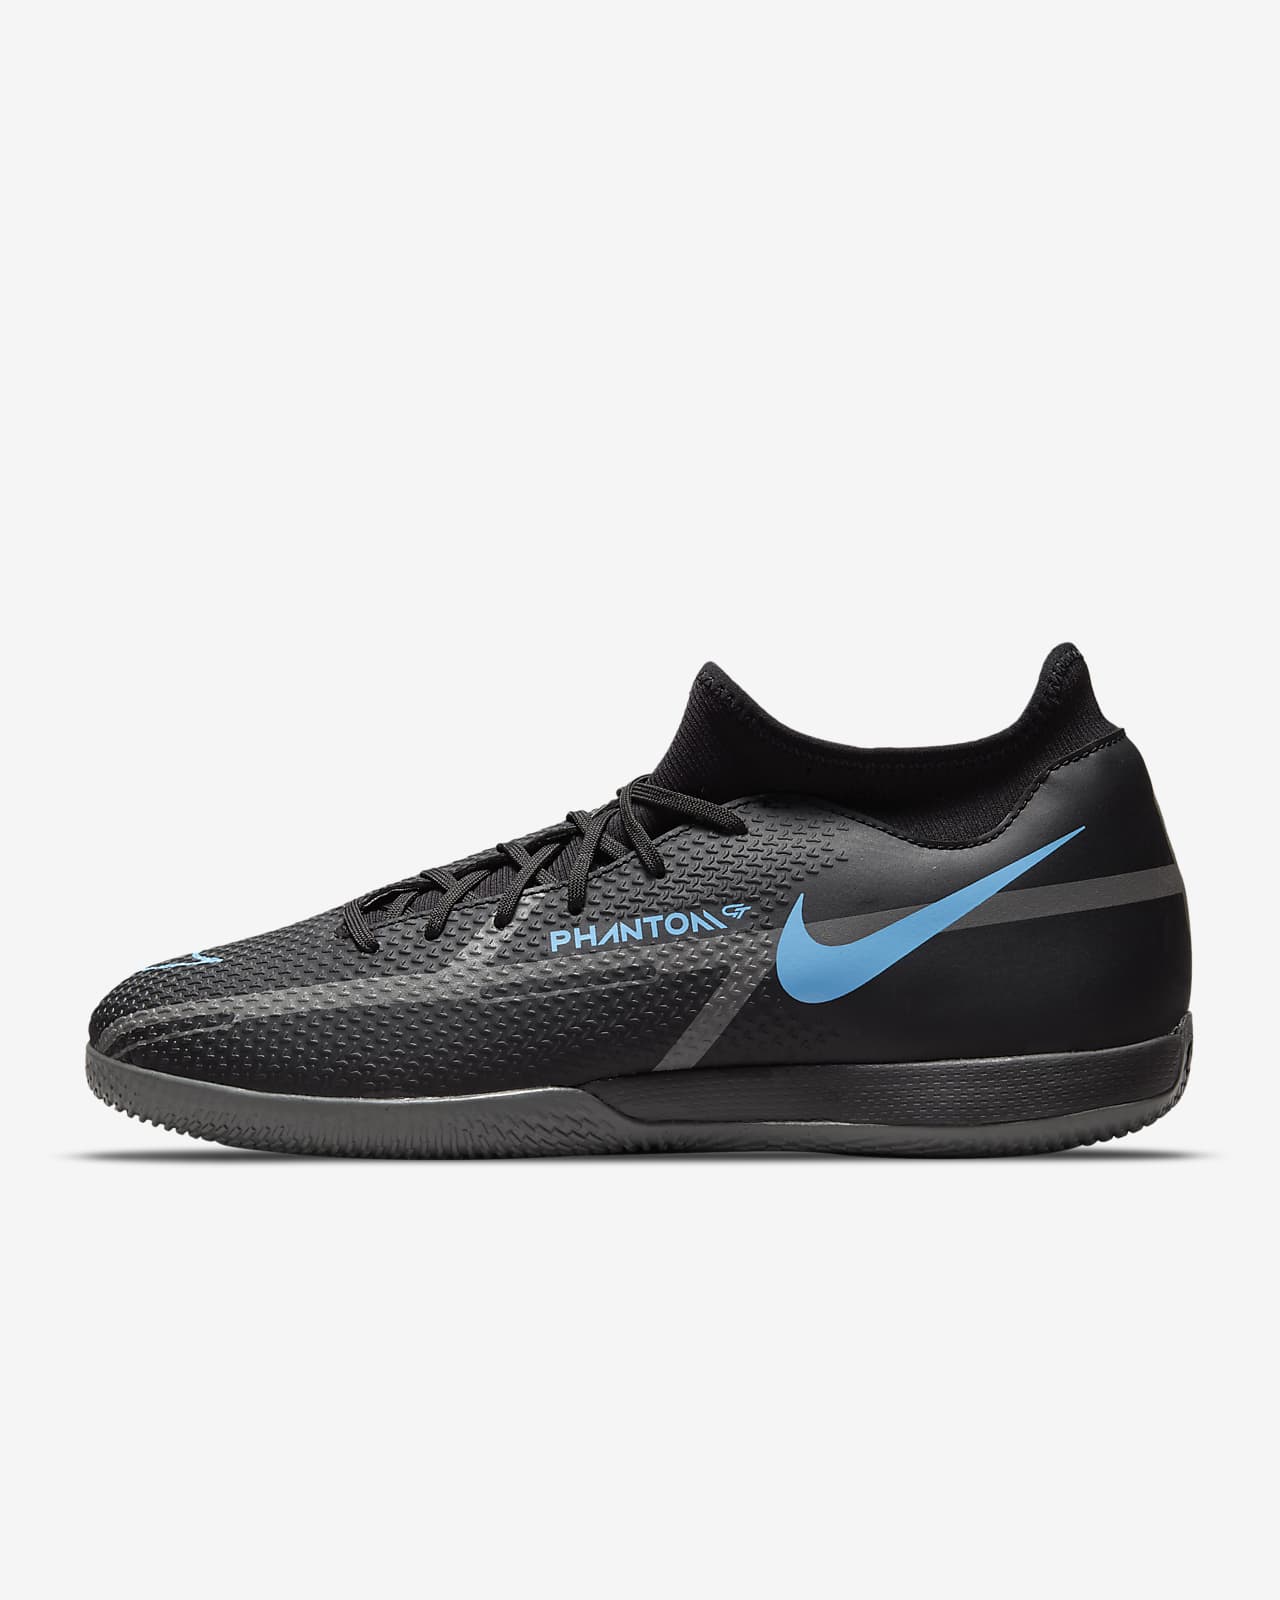 Nike Phantom GT2 Academy Dynamic Fit IC Indoor/Court Soccer Shoe